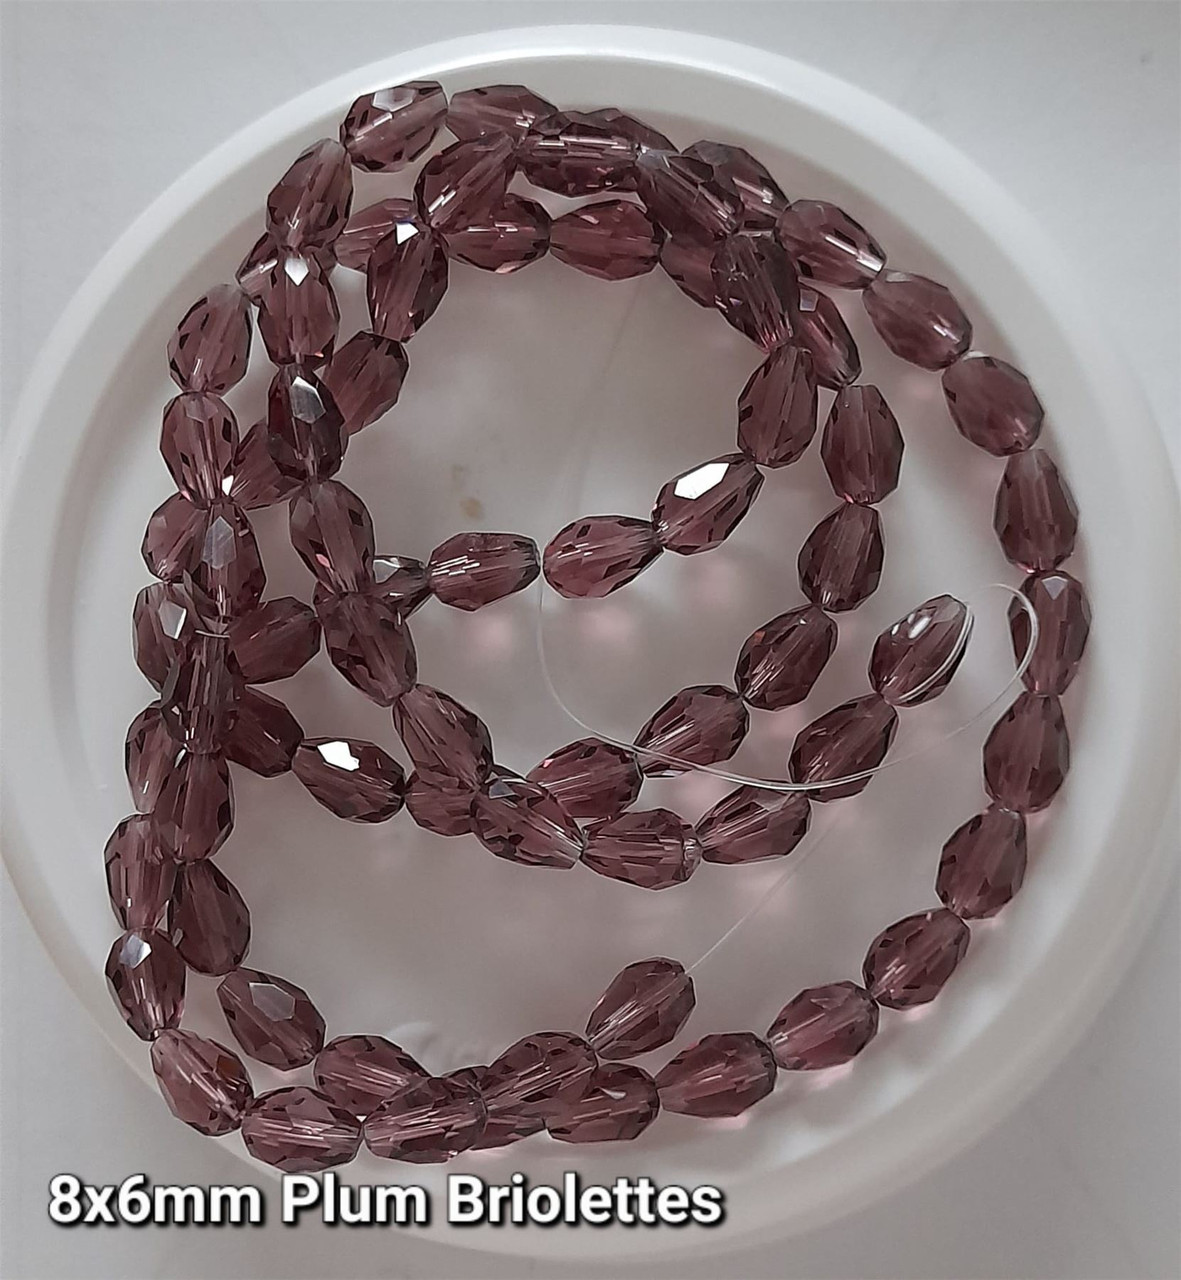 Strand of faceted drop glass beads (briolettes) - approx 8x6mm, Plum, approx 72 beads